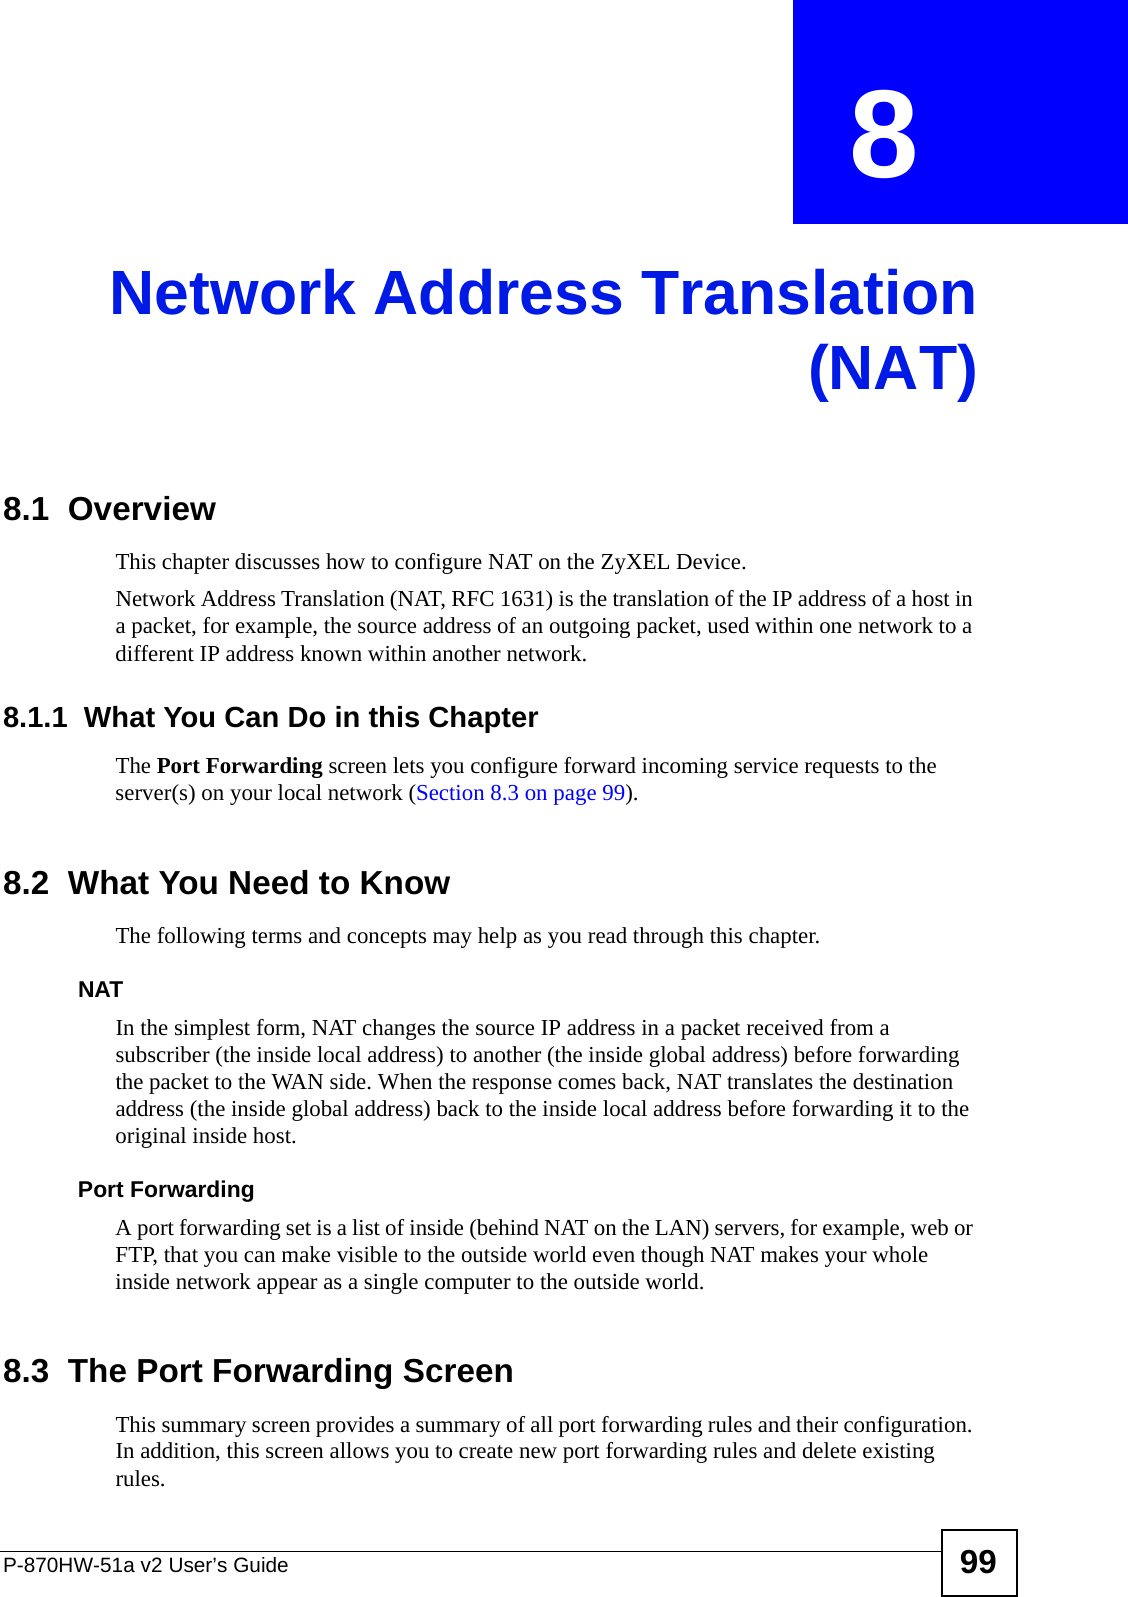 P-870HW-51a v2 User’s Guide 99CHAPTER  8 Network Address Translation(NAT)8.1  Overview This chapter discusses how to configure NAT on the ZyXEL Device.Network Address Translation (NAT, RFC 1631) is the translation of the IP address of a host in a packet, for example, the source address of an outgoing packet, used within one network to a different IP address known within another network. 8.1.1  What You Can Do in this ChapterThe Port Forwarding screen lets you configure forward incoming service requests to the server(s) on your local network (Section 8.3 on page 99).8.2  What You Need to KnowThe following terms and concepts may help as you read through this chapter.NATIn the simplest form, NAT changes the source IP address in a packet received from a subscriber (the inside local address) to another (the inside global address) before forwarding the packet to the WAN side. When the response comes back, NAT translates the destination address (the inside global address) back to the inside local address before forwarding it to the original inside host.Port ForwardingA port forwarding set is a list of inside (behind NAT on the LAN) servers, for example, web or FTP, that you can make visible to the outside world even though NAT makes your whole inside network appear as a single computer to the outside world.8.3  The Port Forwarding ScreenThis summary screen provides a summary of all port forwarding rules and their configuration. In addition, this screen allows you to create new port forwarding rules and delete existing rules.